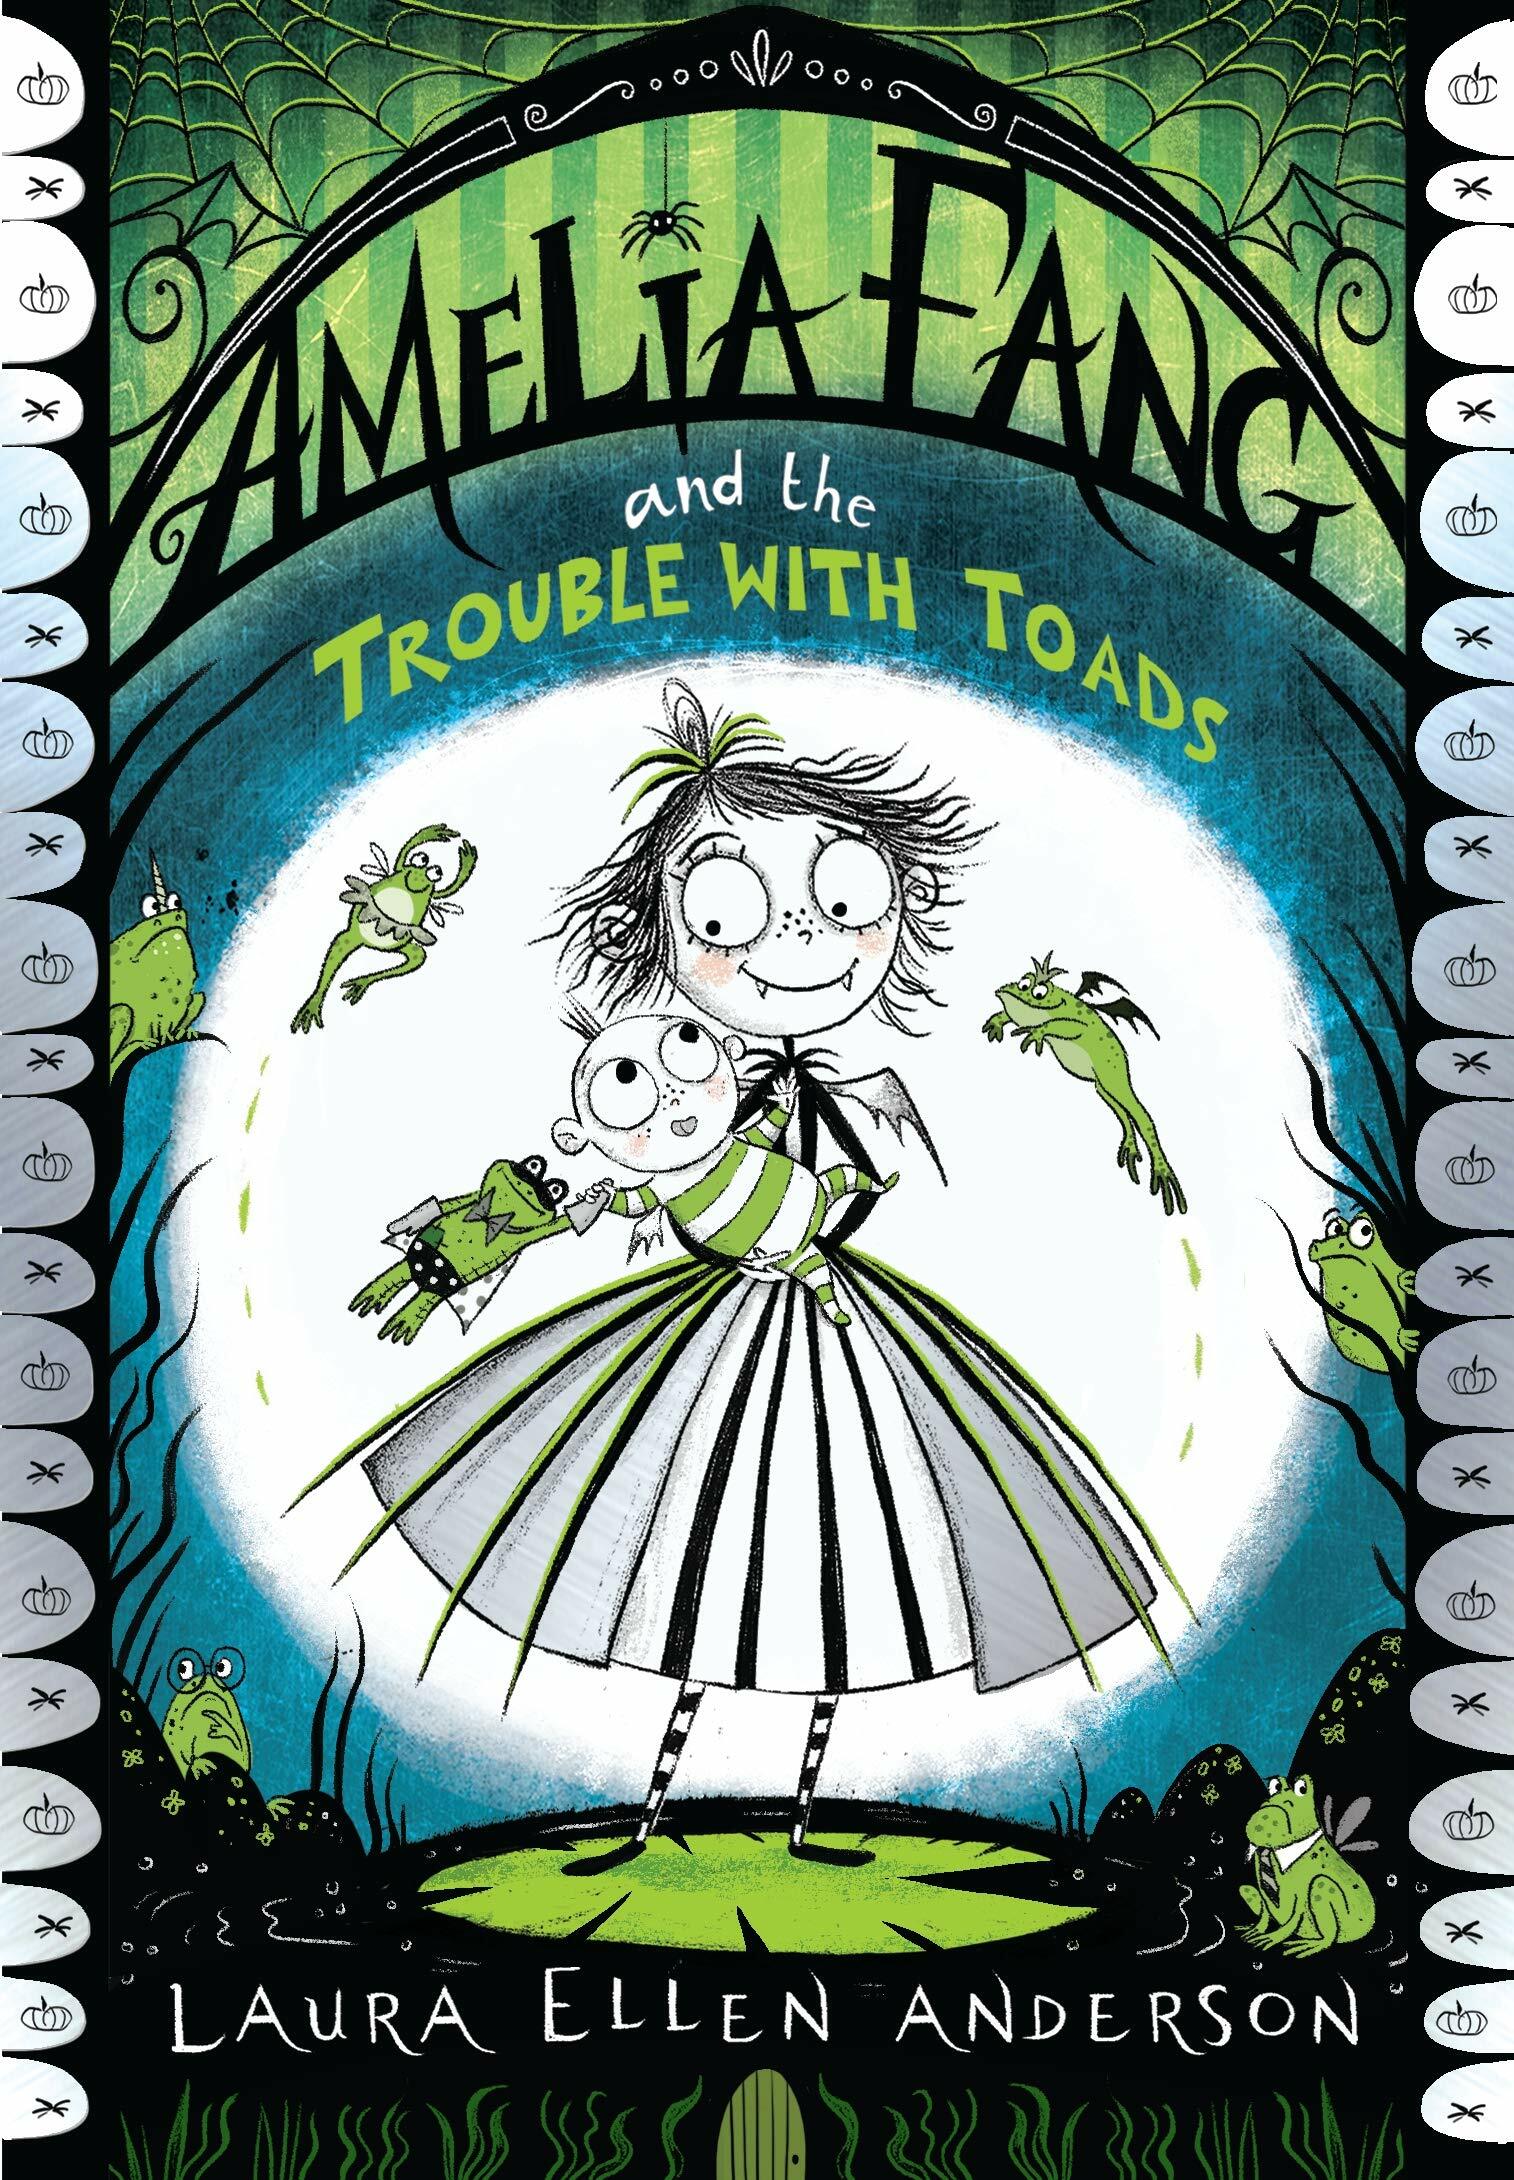 Amelia Fang and the Trouble with Toads (Paperback)